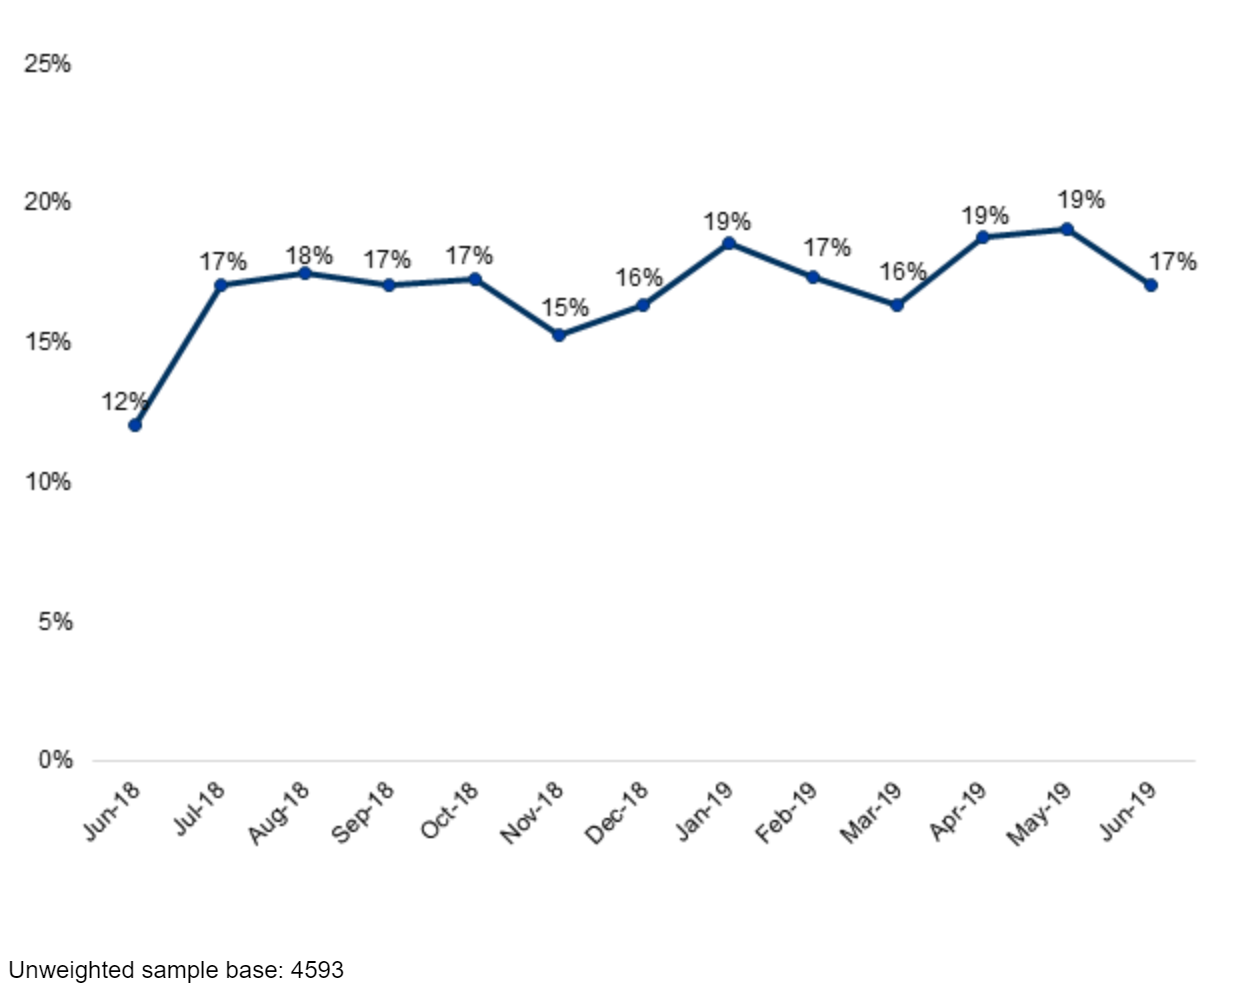 Line graph showing that response rates ranged between 12% and 19% each month, from June 2018 to June 2019.